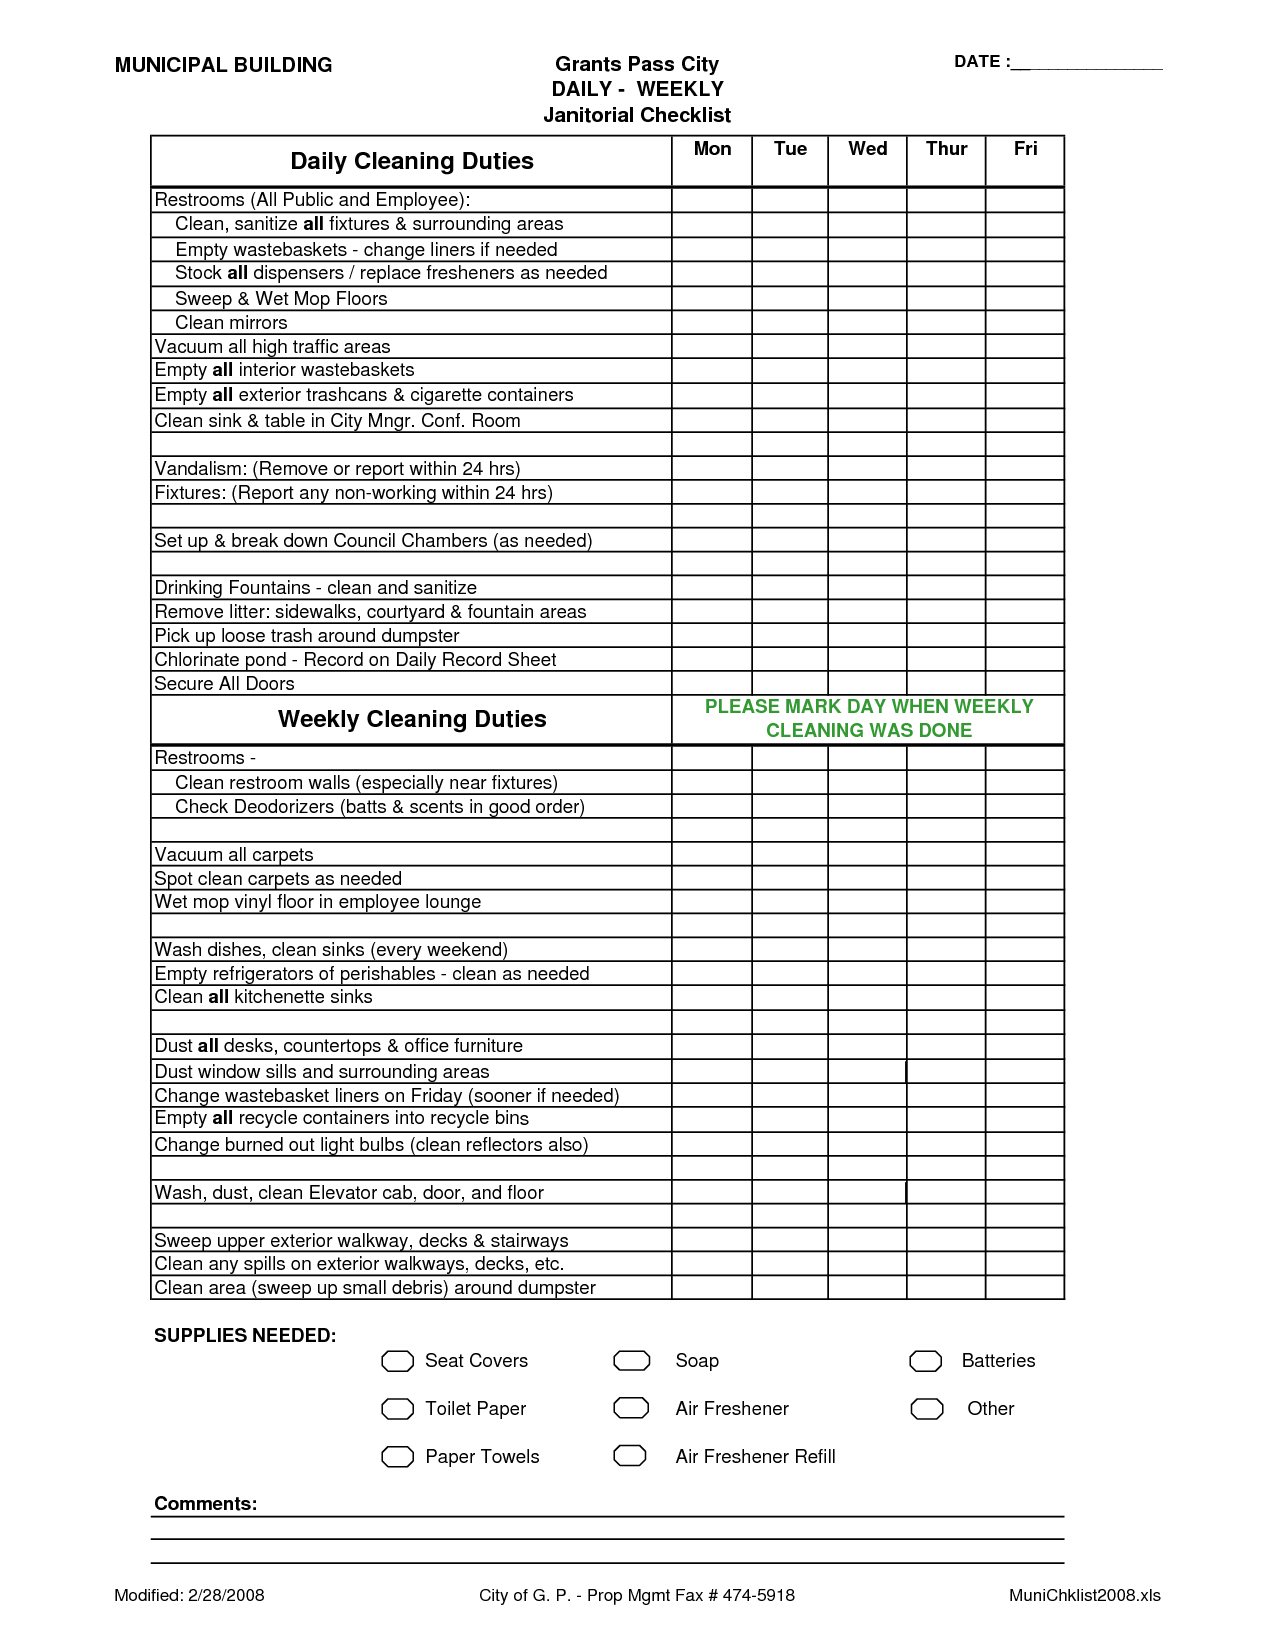 c​o​m​m​e​r​c​i​a​l​ ​o​f​f​i​c​e​ ​c​l​e​a​n​i​n​g​ ​c​h​e​c​k​l  With Janitorial Cleaning Checklist Template Inside Janitorial Cleaning Checklist Template